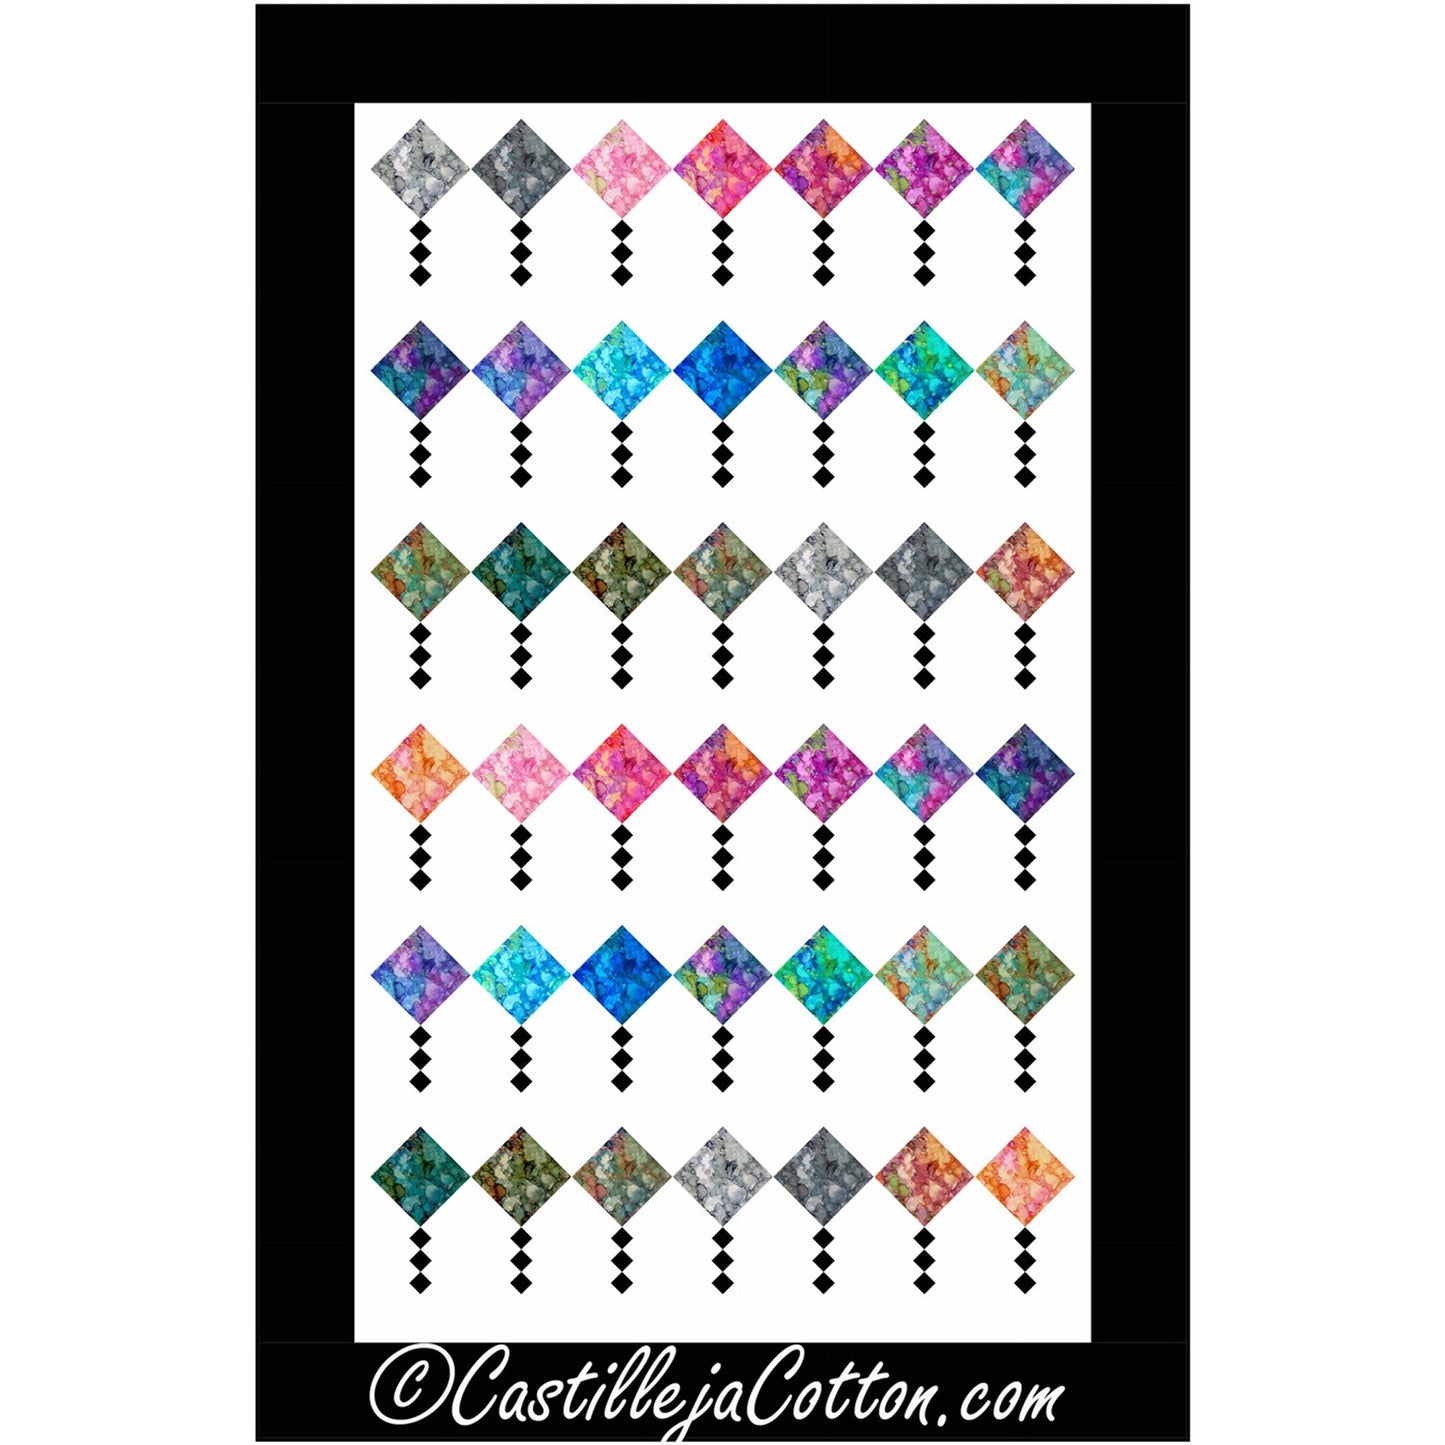 Colorful quilt with colorful kites: diamonds with smaller diamonds below them for tails.  Perfect for adding a pop of color and texture to any room.